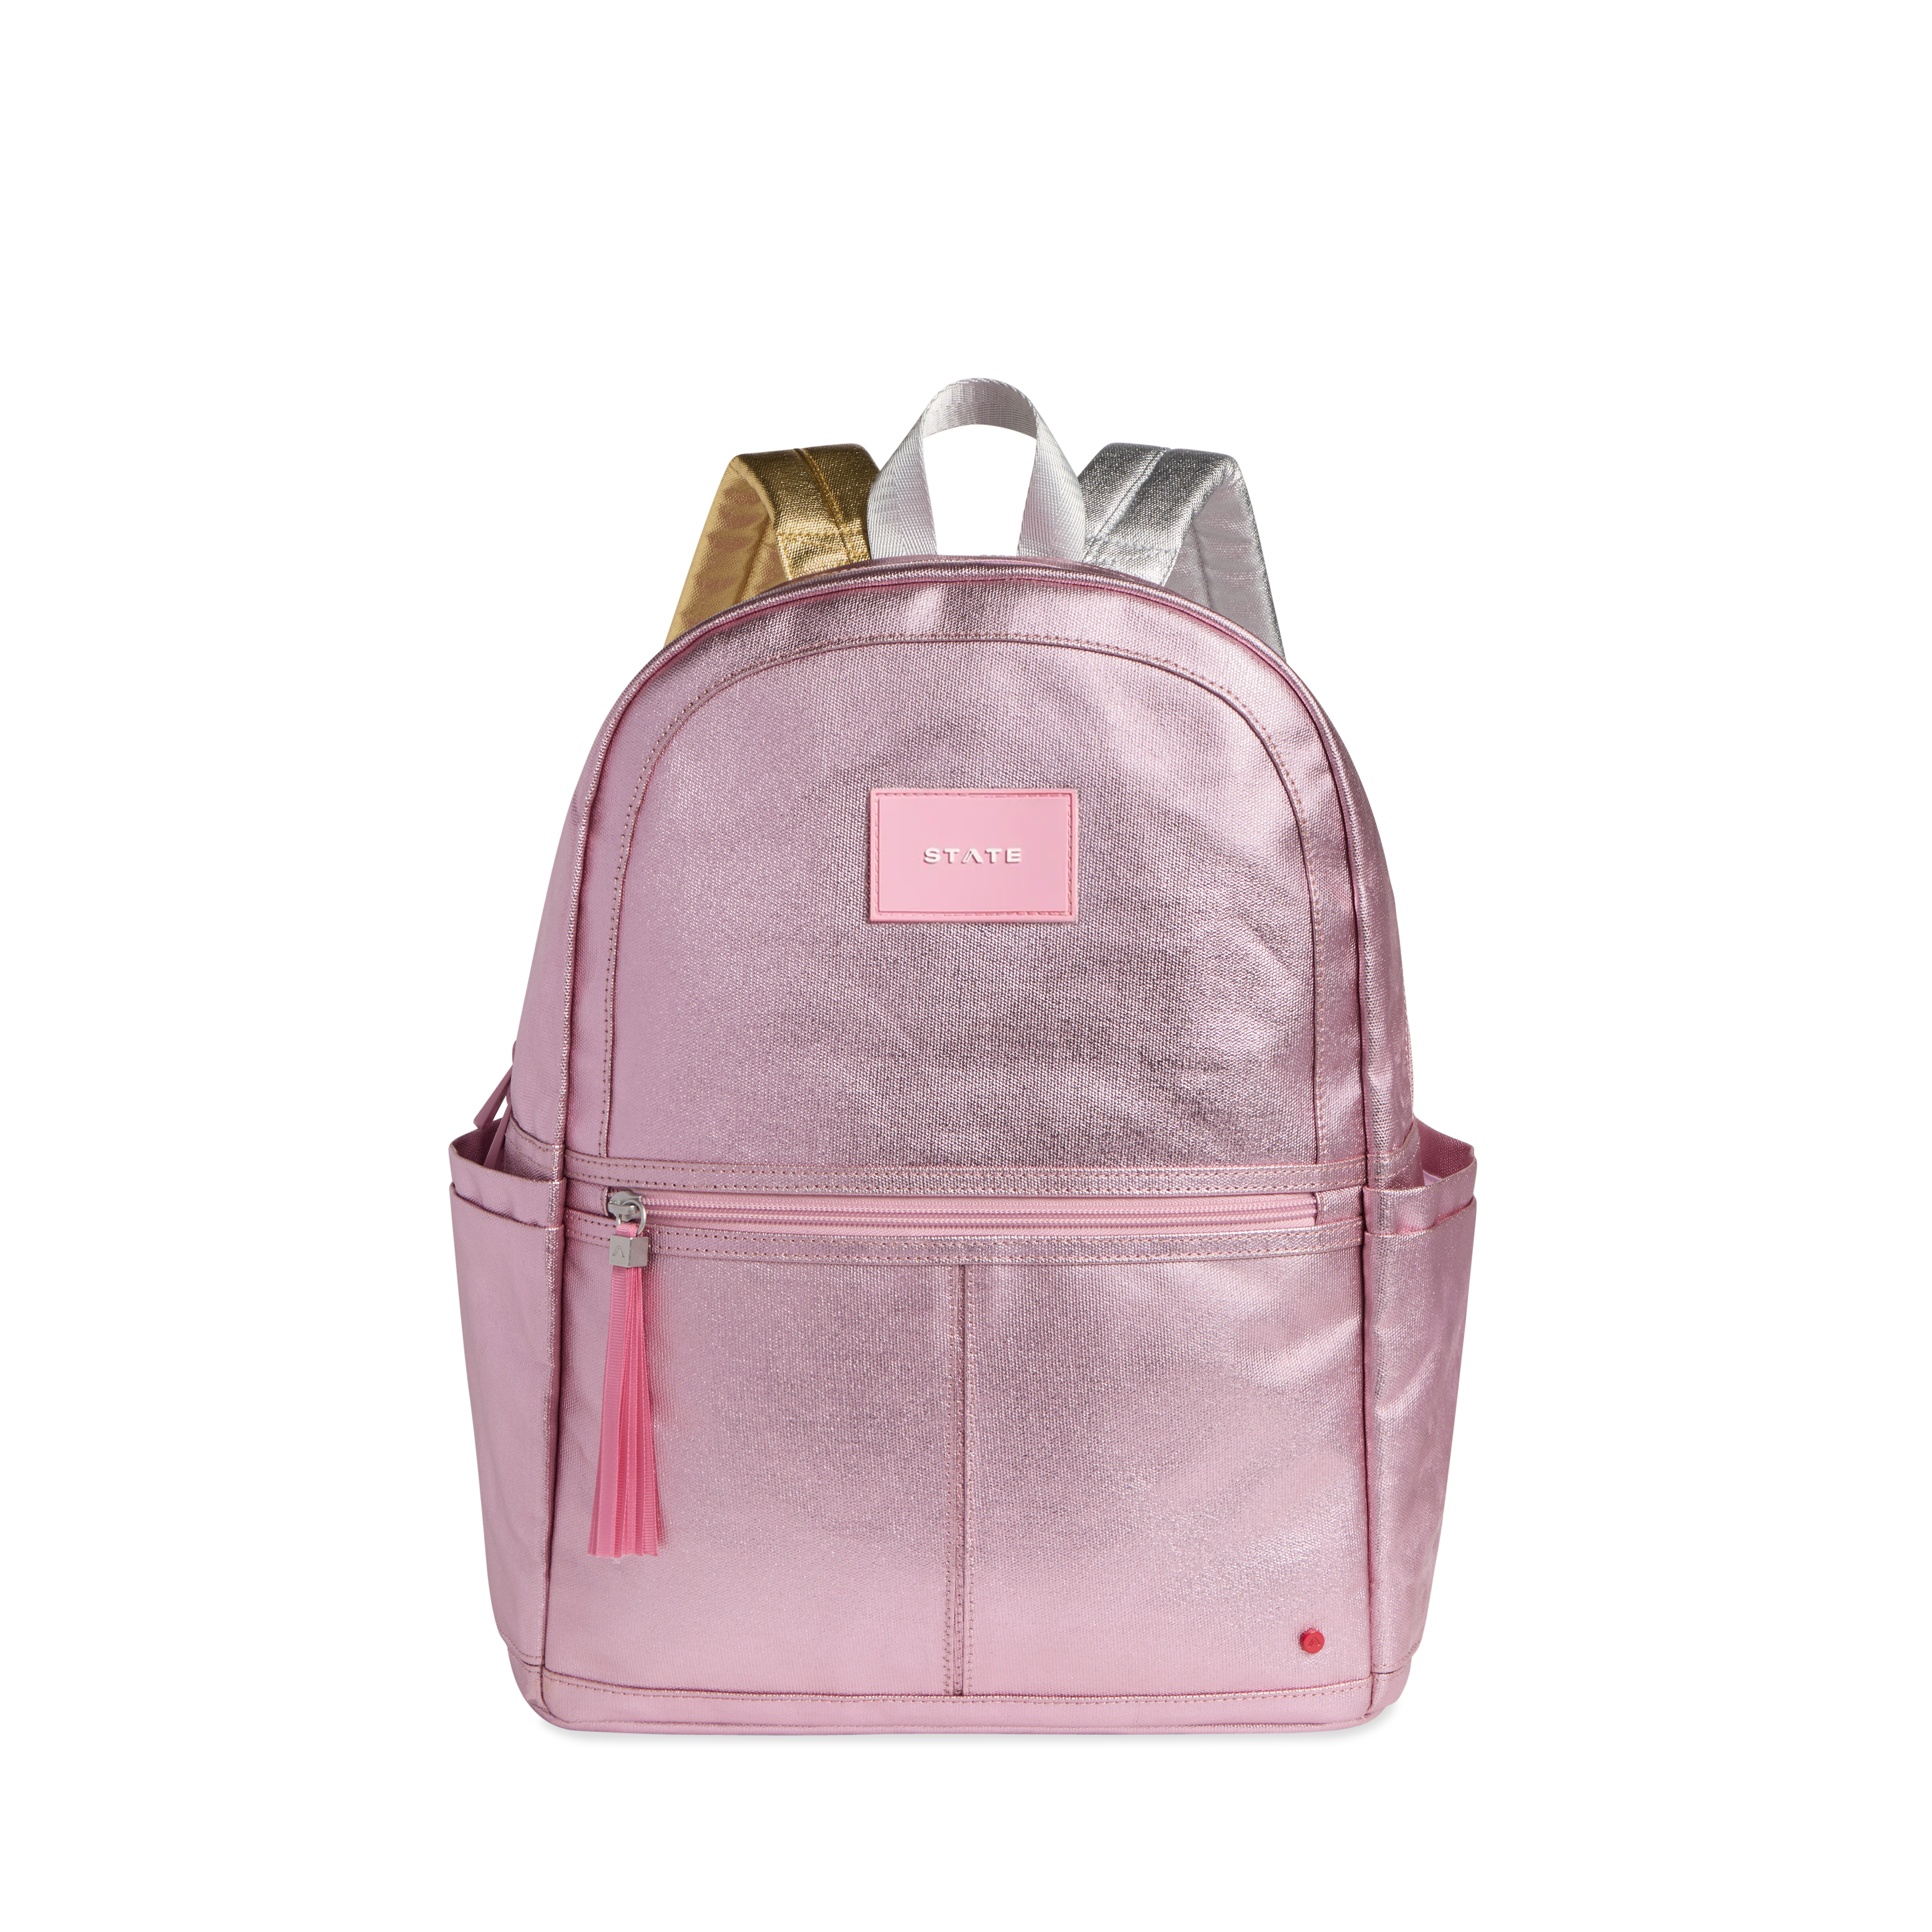 Recycled Double Pocket Backpack Medium in Rose Gold/Silver, Recycled Polyester by Quince